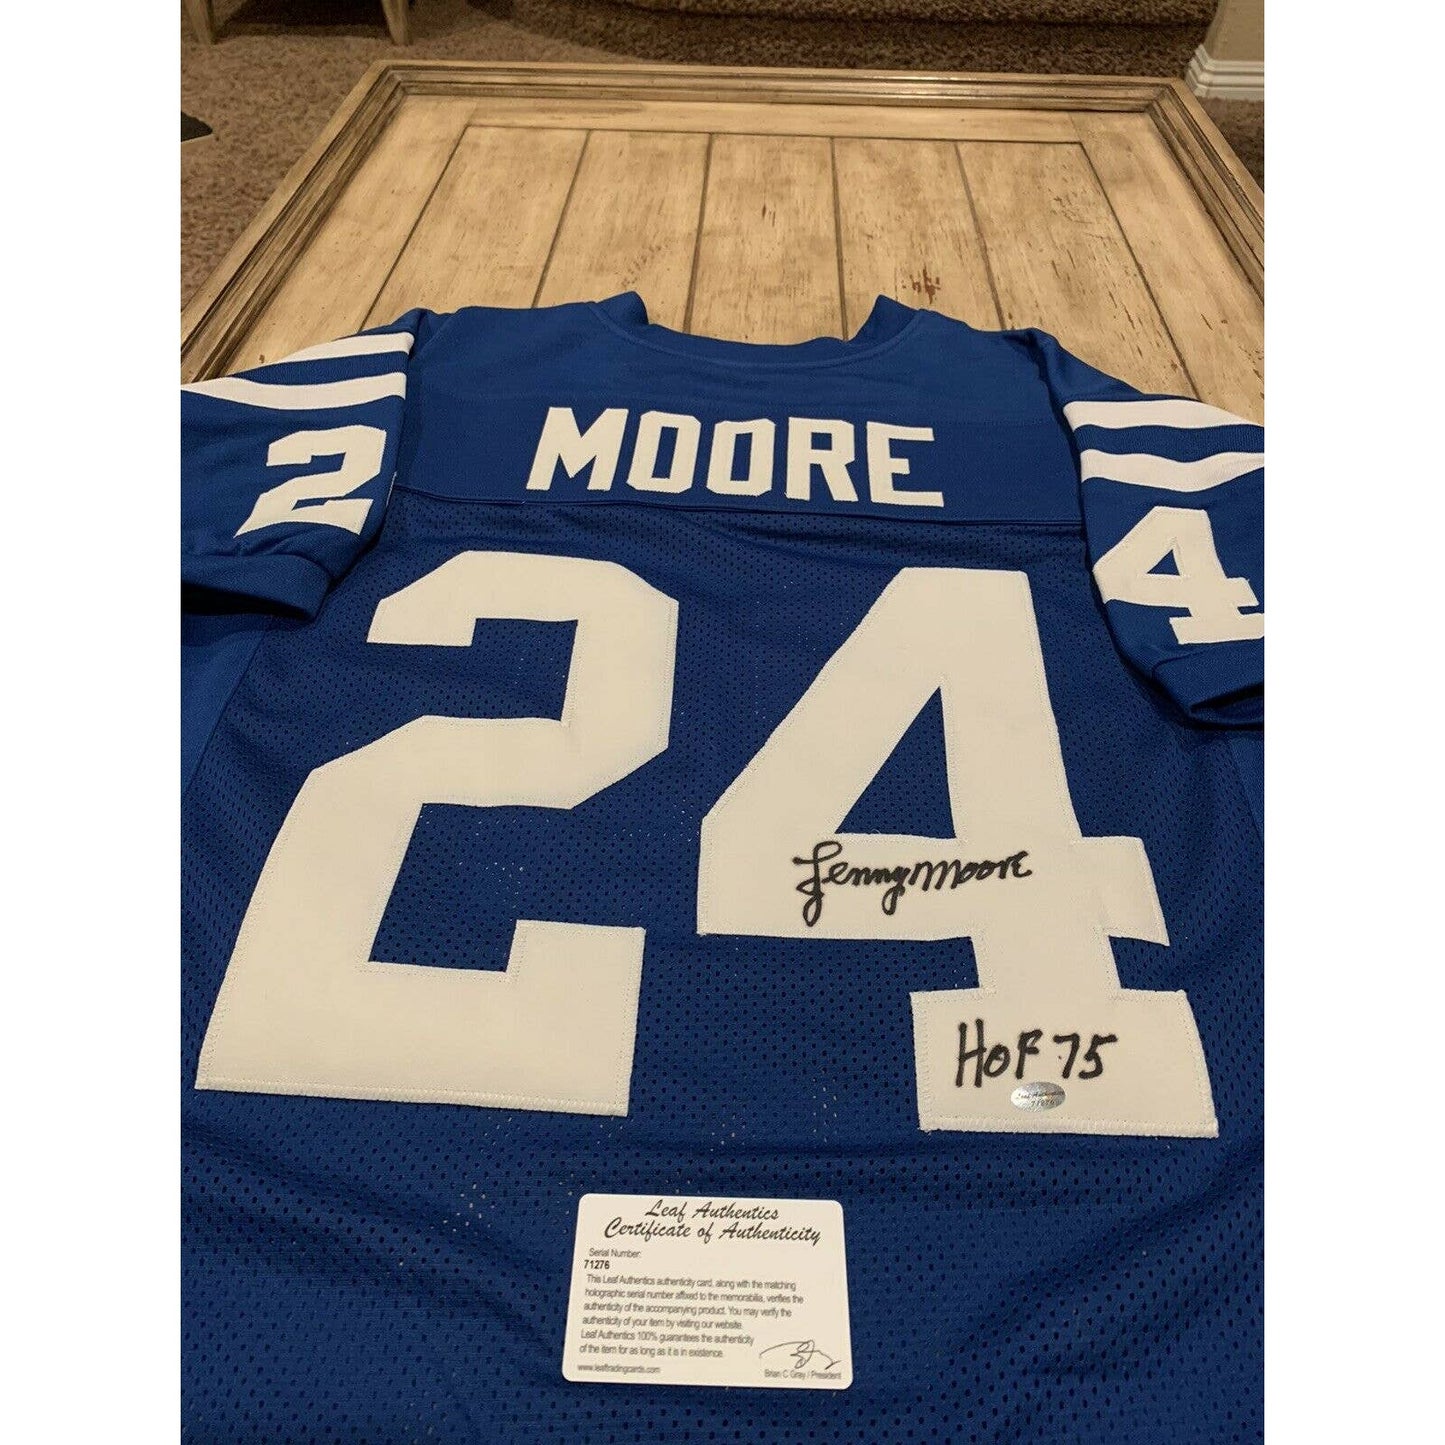 Lenny Moore Autographed/Signed Jersey LEAF COA Baltimore Indianapolis Colts - TreasuresEvolved